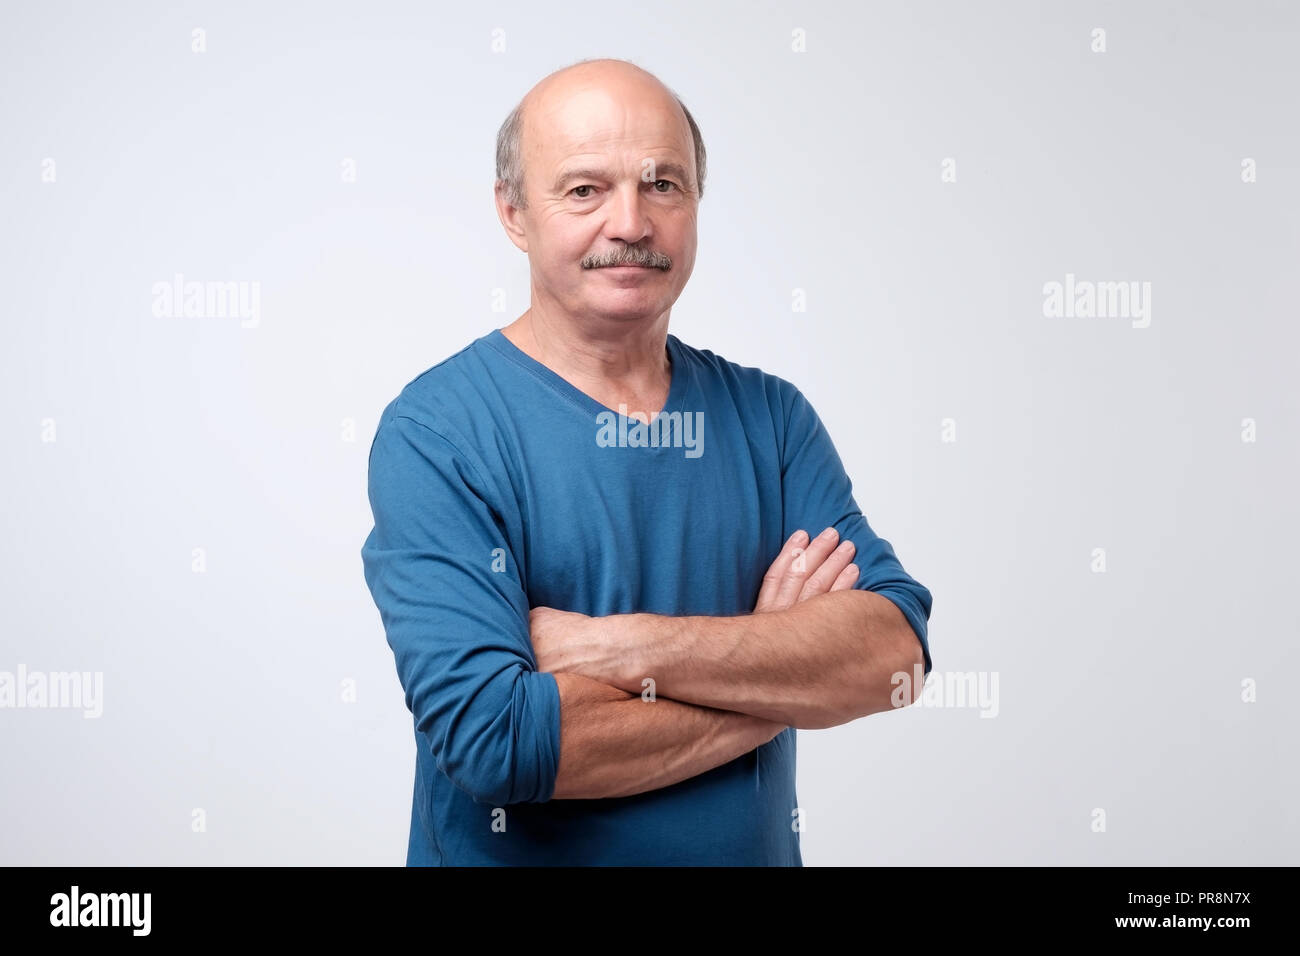 Portrait of mature european man with mustache in blue shirt having his arms crossed, looking at camera Stock Photo